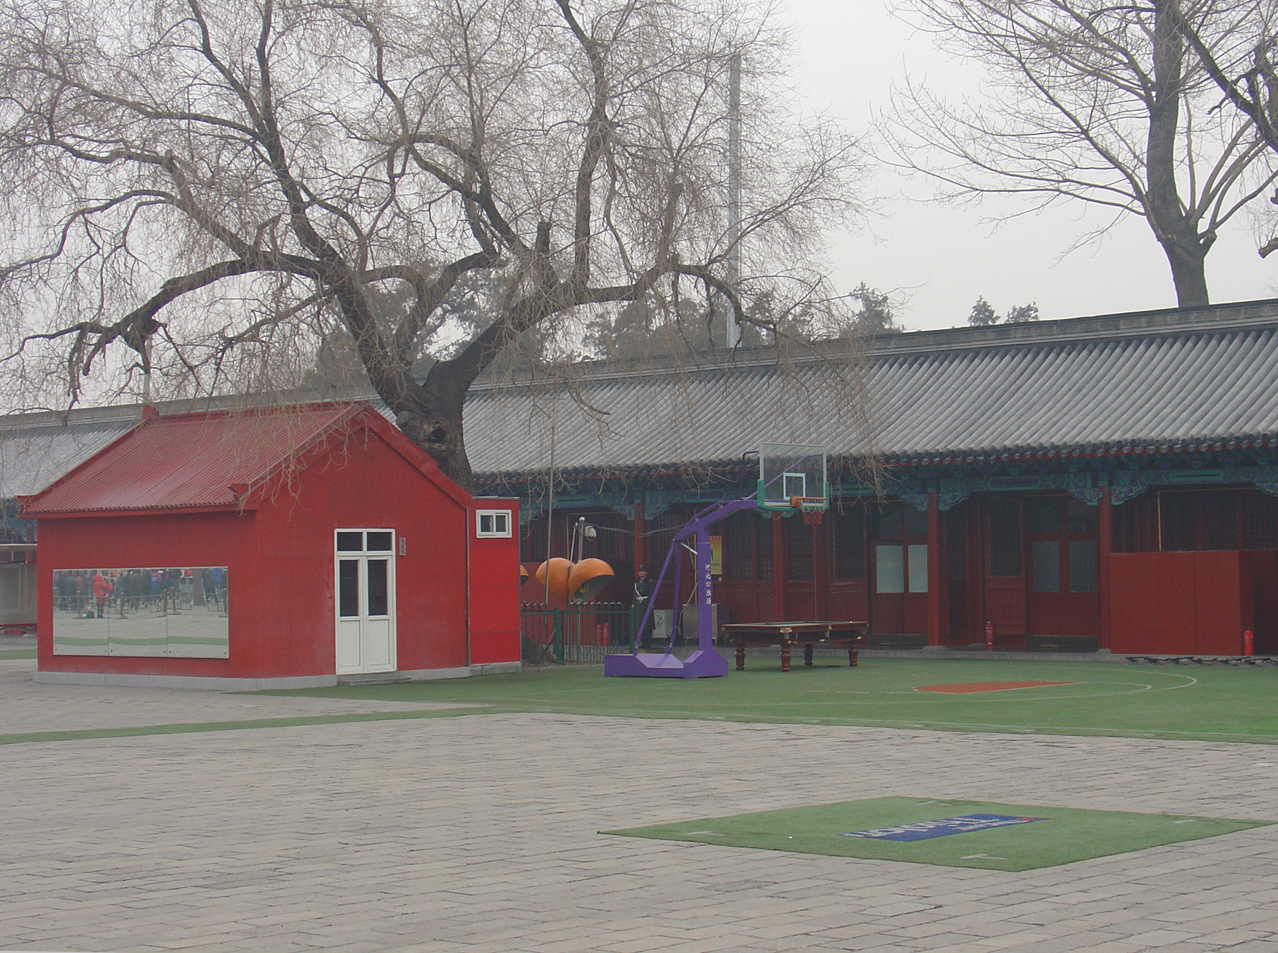 A basket ball hoop and a pool table in the Forbidden City